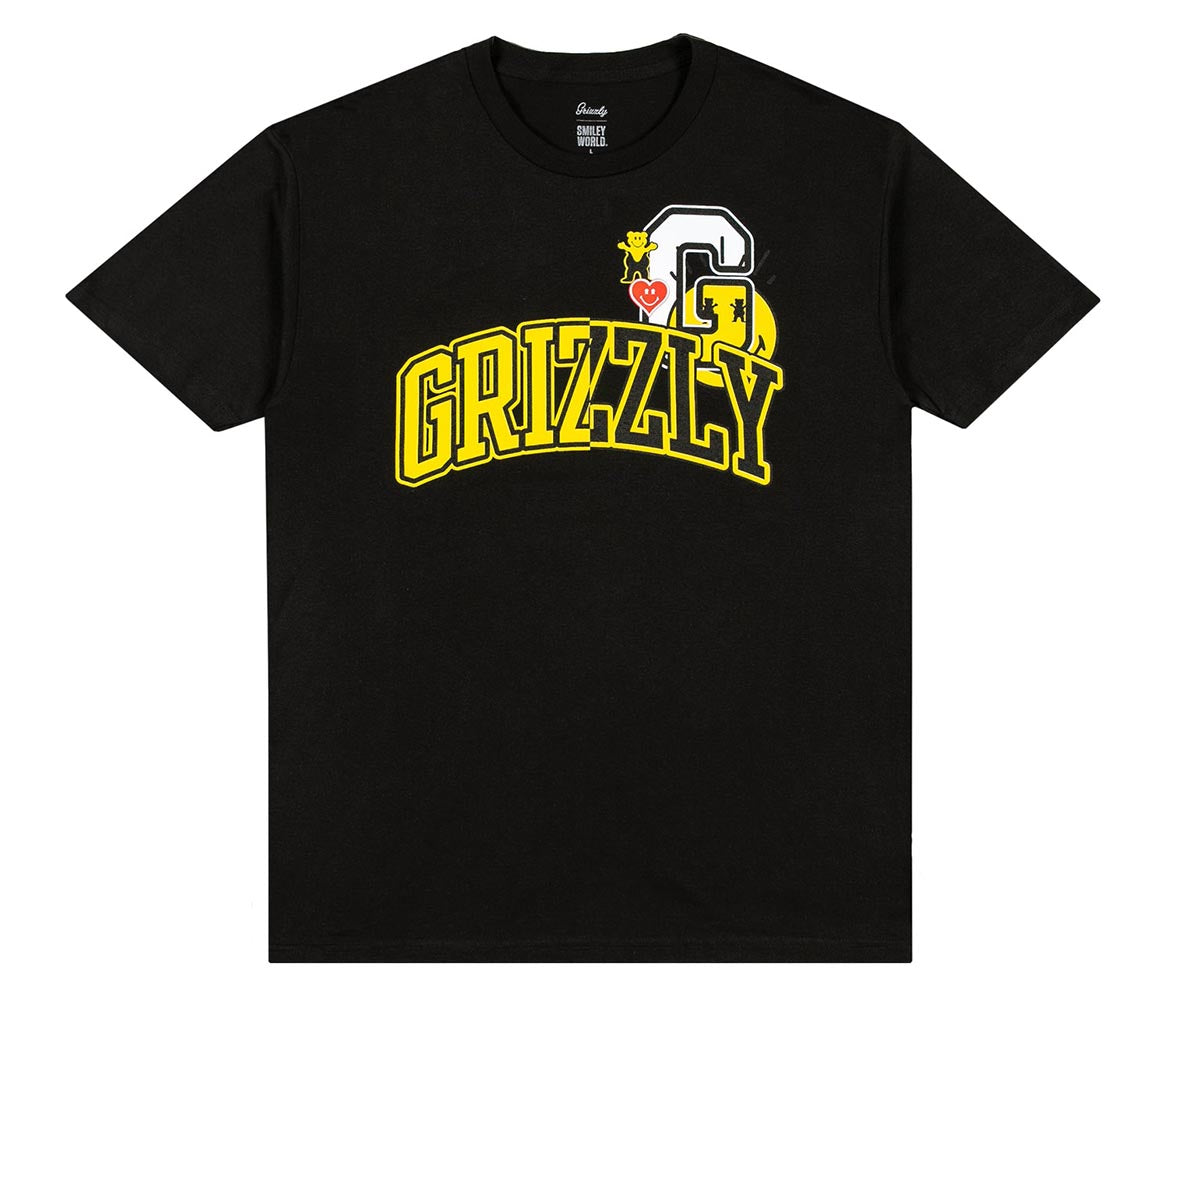 Grizzly x Smiley World School Of Happiness T-Shirt - Black image 1